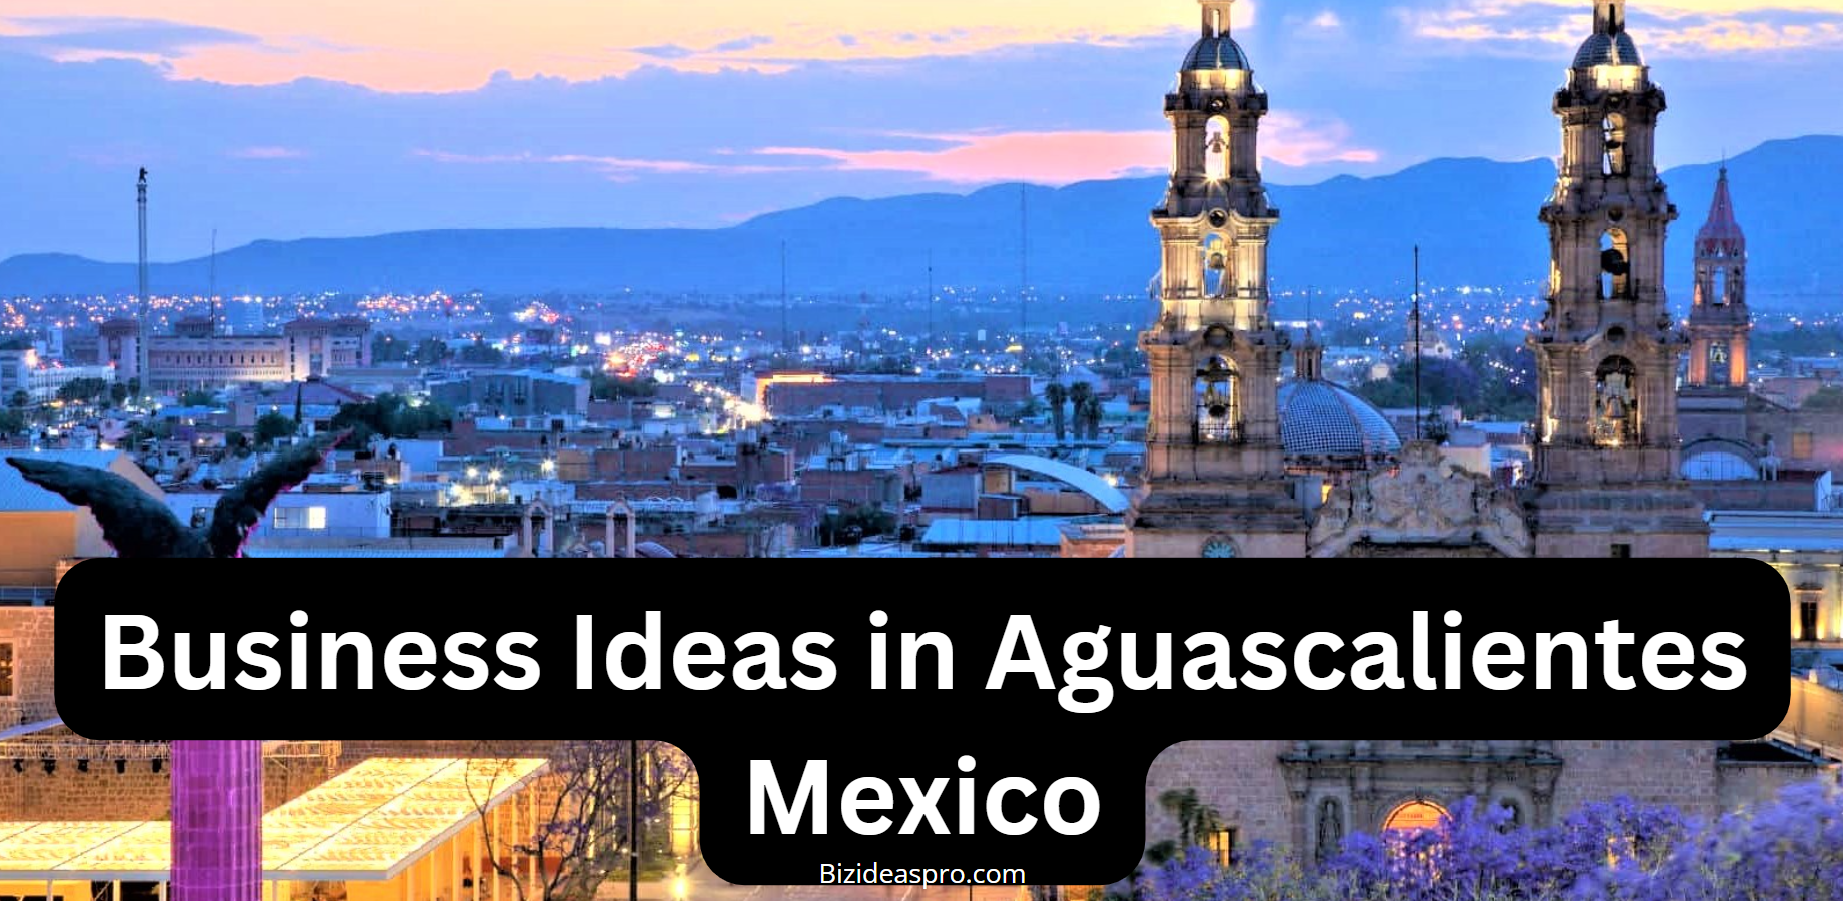 Business Ideas in Aguascalientes Mexico